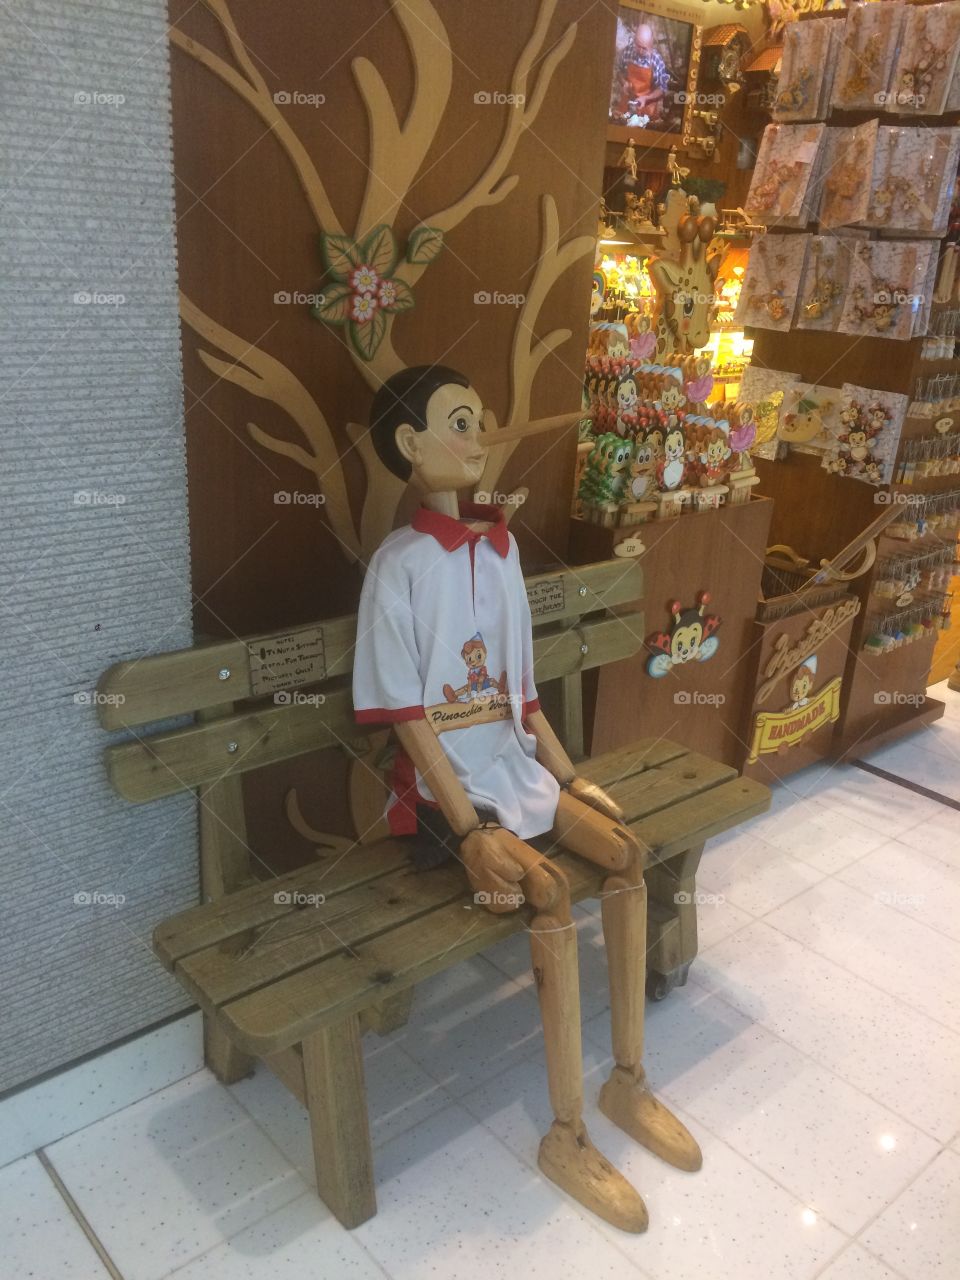 Wooden Life Size Puppet of Pinocchio